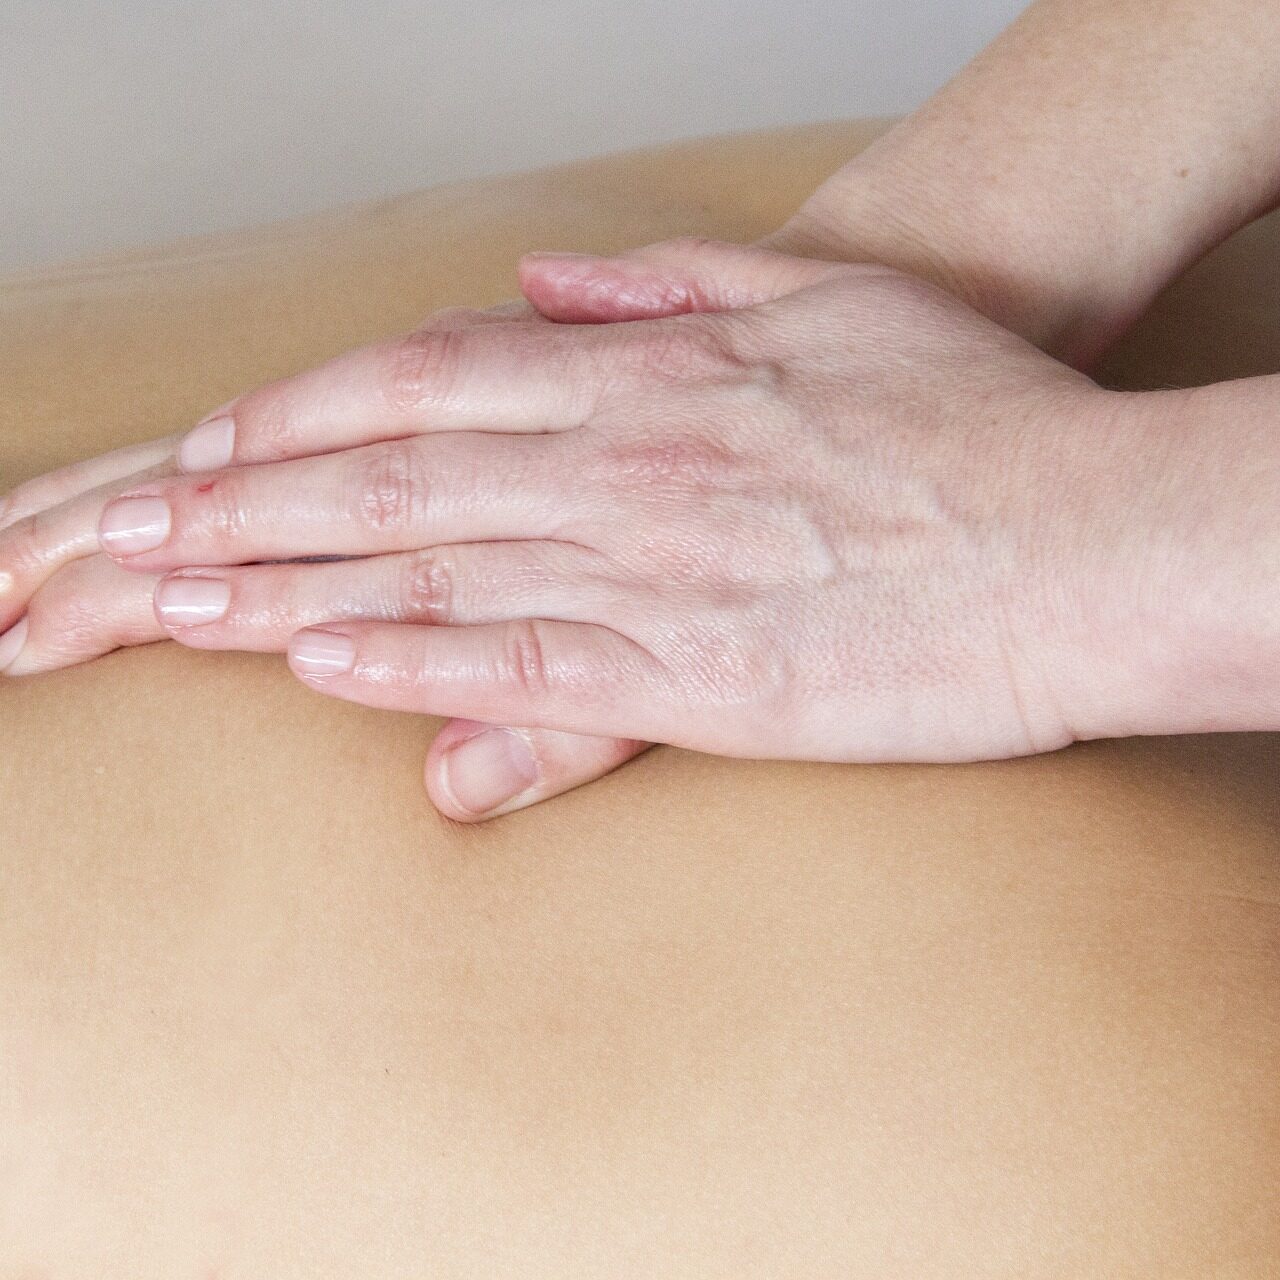 Therapeutic Massage, craniosacral therapy, low back pain, headaches, migraines, neck pain, energy work, reiki